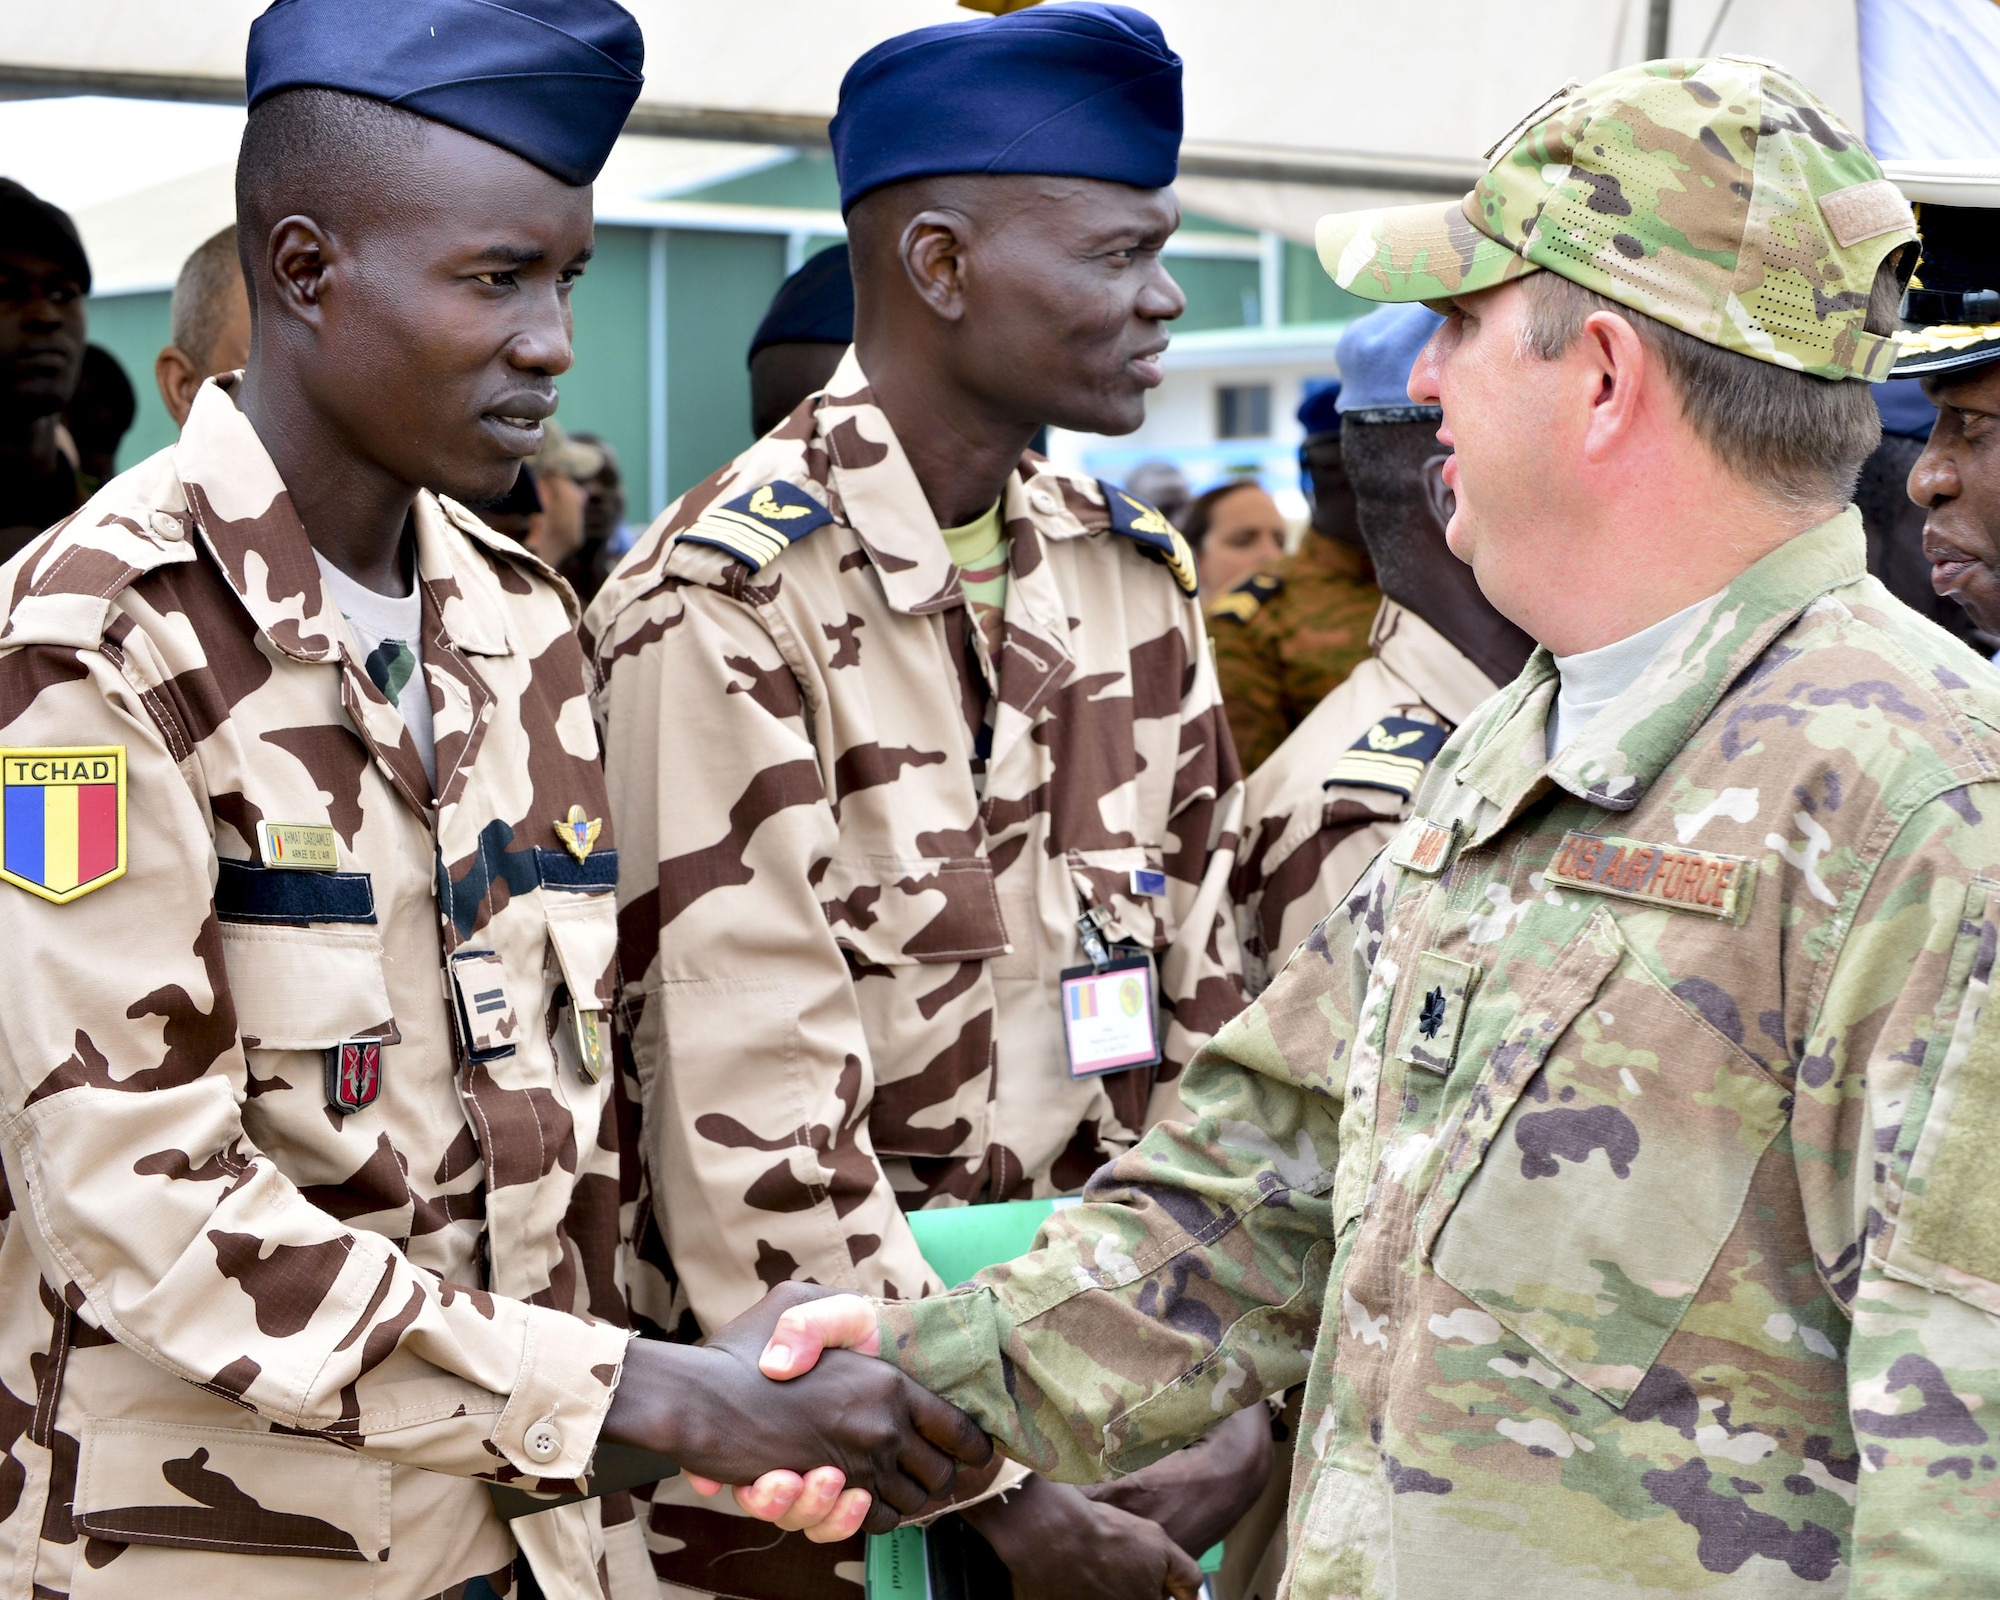 U.S. Air Force Lt. Col Brady Vaira, right, 435th Contingency Response Group deputy commander, meets with airman from Chad following African Partnership Flight opening ceremony Sept. 12, 2016. Twelve African counties are participating in AFP Ghana with the common goal of increasing regional capabilities while building relationships throughout West Africa. (U.S. Air Force photo by Staff Sgt. Stephanie Longoria) 